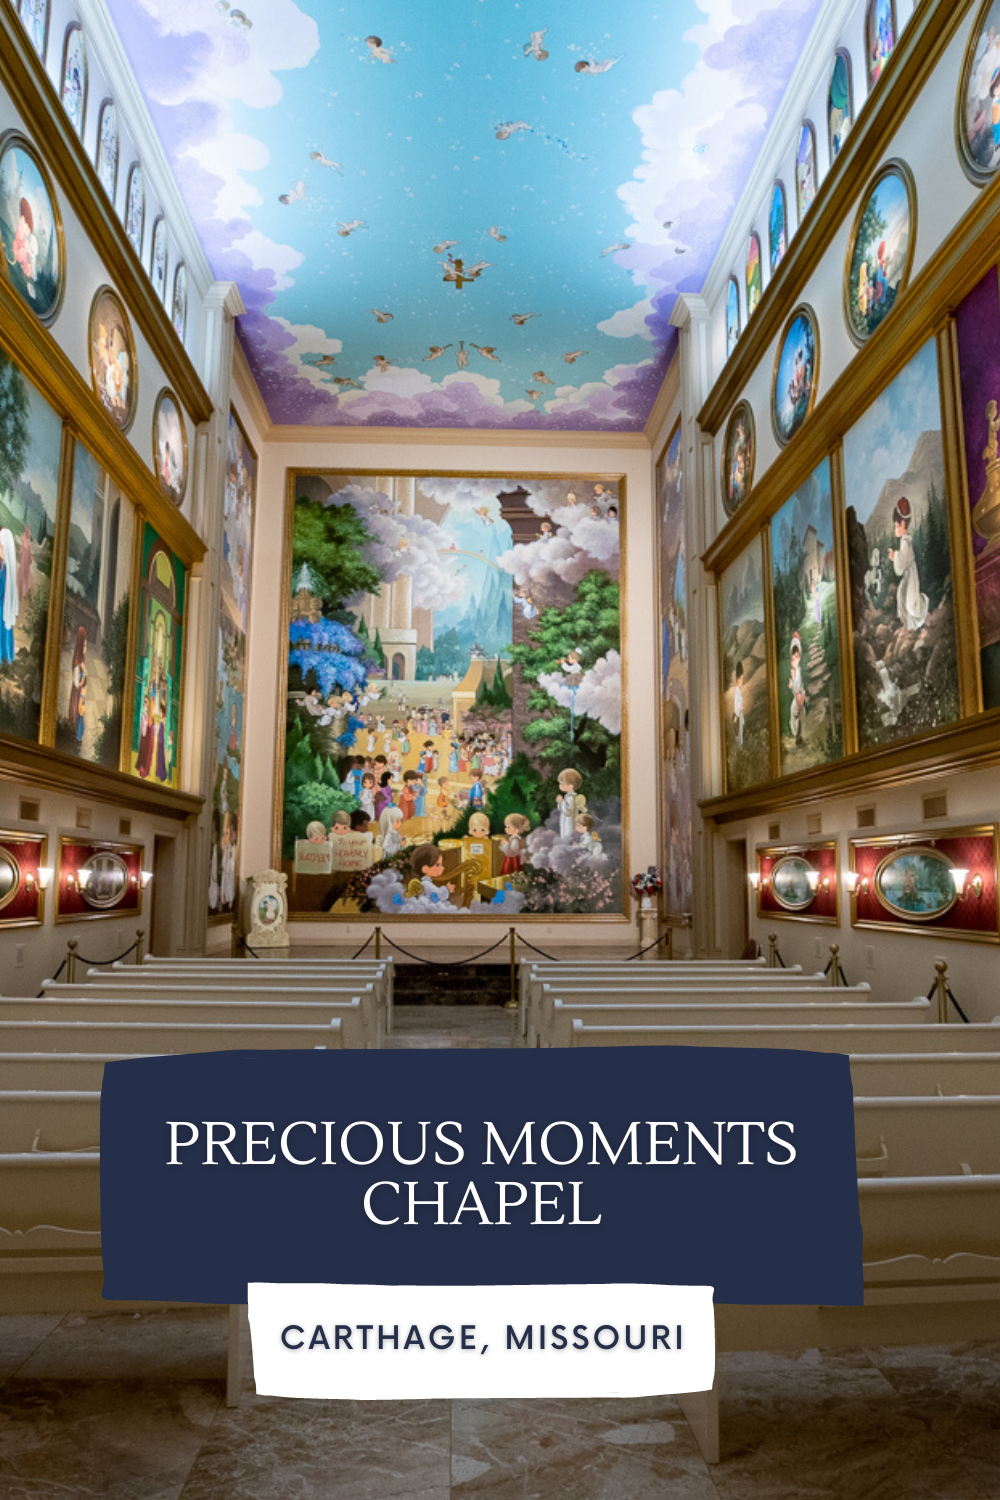 Take a precious moment out of your Missouri road trip to check out this unique attraction: the Precious Moments Chapel in Carthage, Missouri. Visit this roadside attraction on a Missouri road trip or when traveling Route 66.  #RoadTrips #RoadTripStop #Route66 #Route66RoadTrip #MissouriRoute66 #Missouri #MissouriRoadTrip #MissouriRoadsideAttractions #RoadsideAttractions #RoadsideAttraction #RoadsideAmerica #RoadTrip